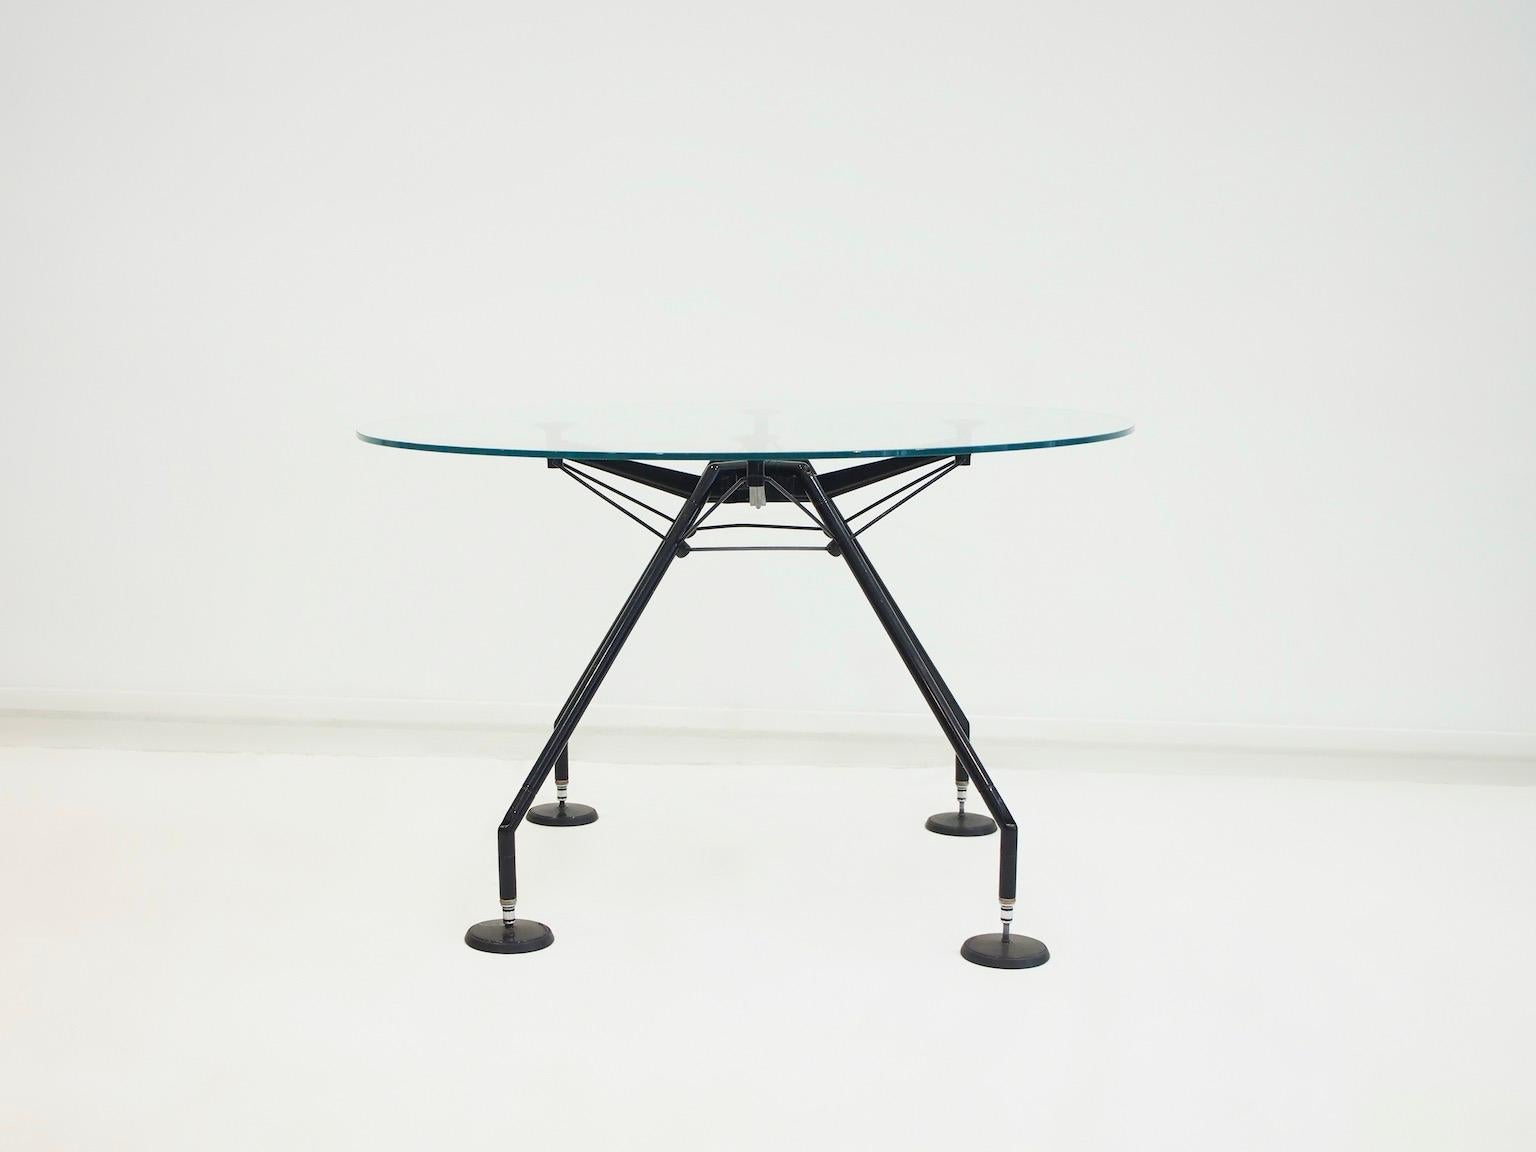 Round table, model Nomos, design by Sir Norman Foster & Partner for Tecno, Italy. Designed in 1986. Black painted metal, plastic. Loose clear glass plate. Manufacturer's mark. Minor wear marks.